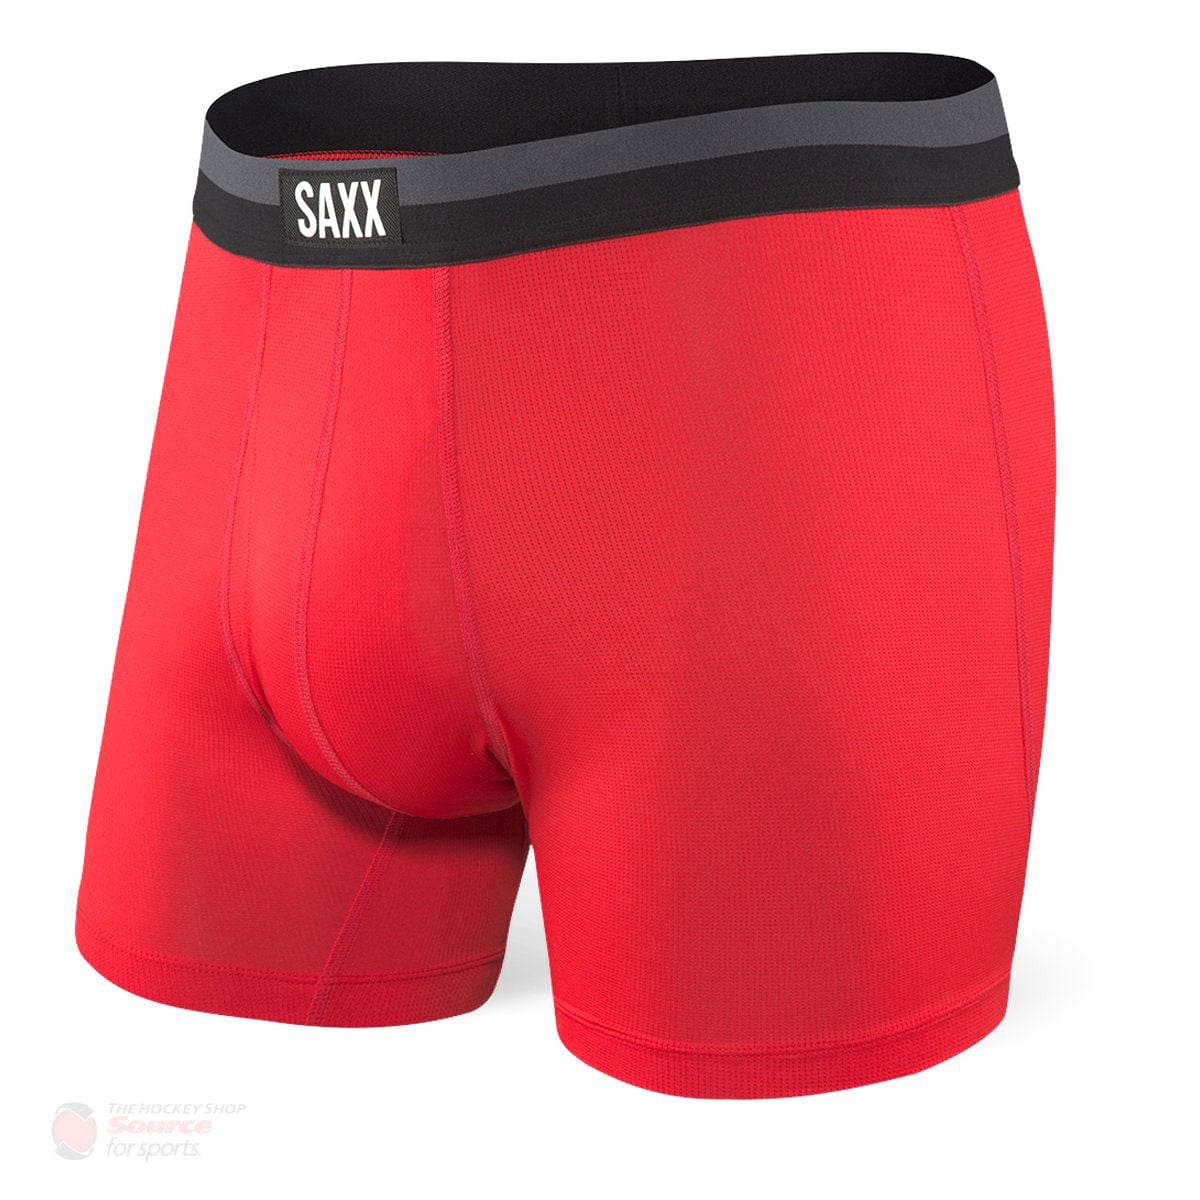 Saxx Sport Mesh Boxers - Red